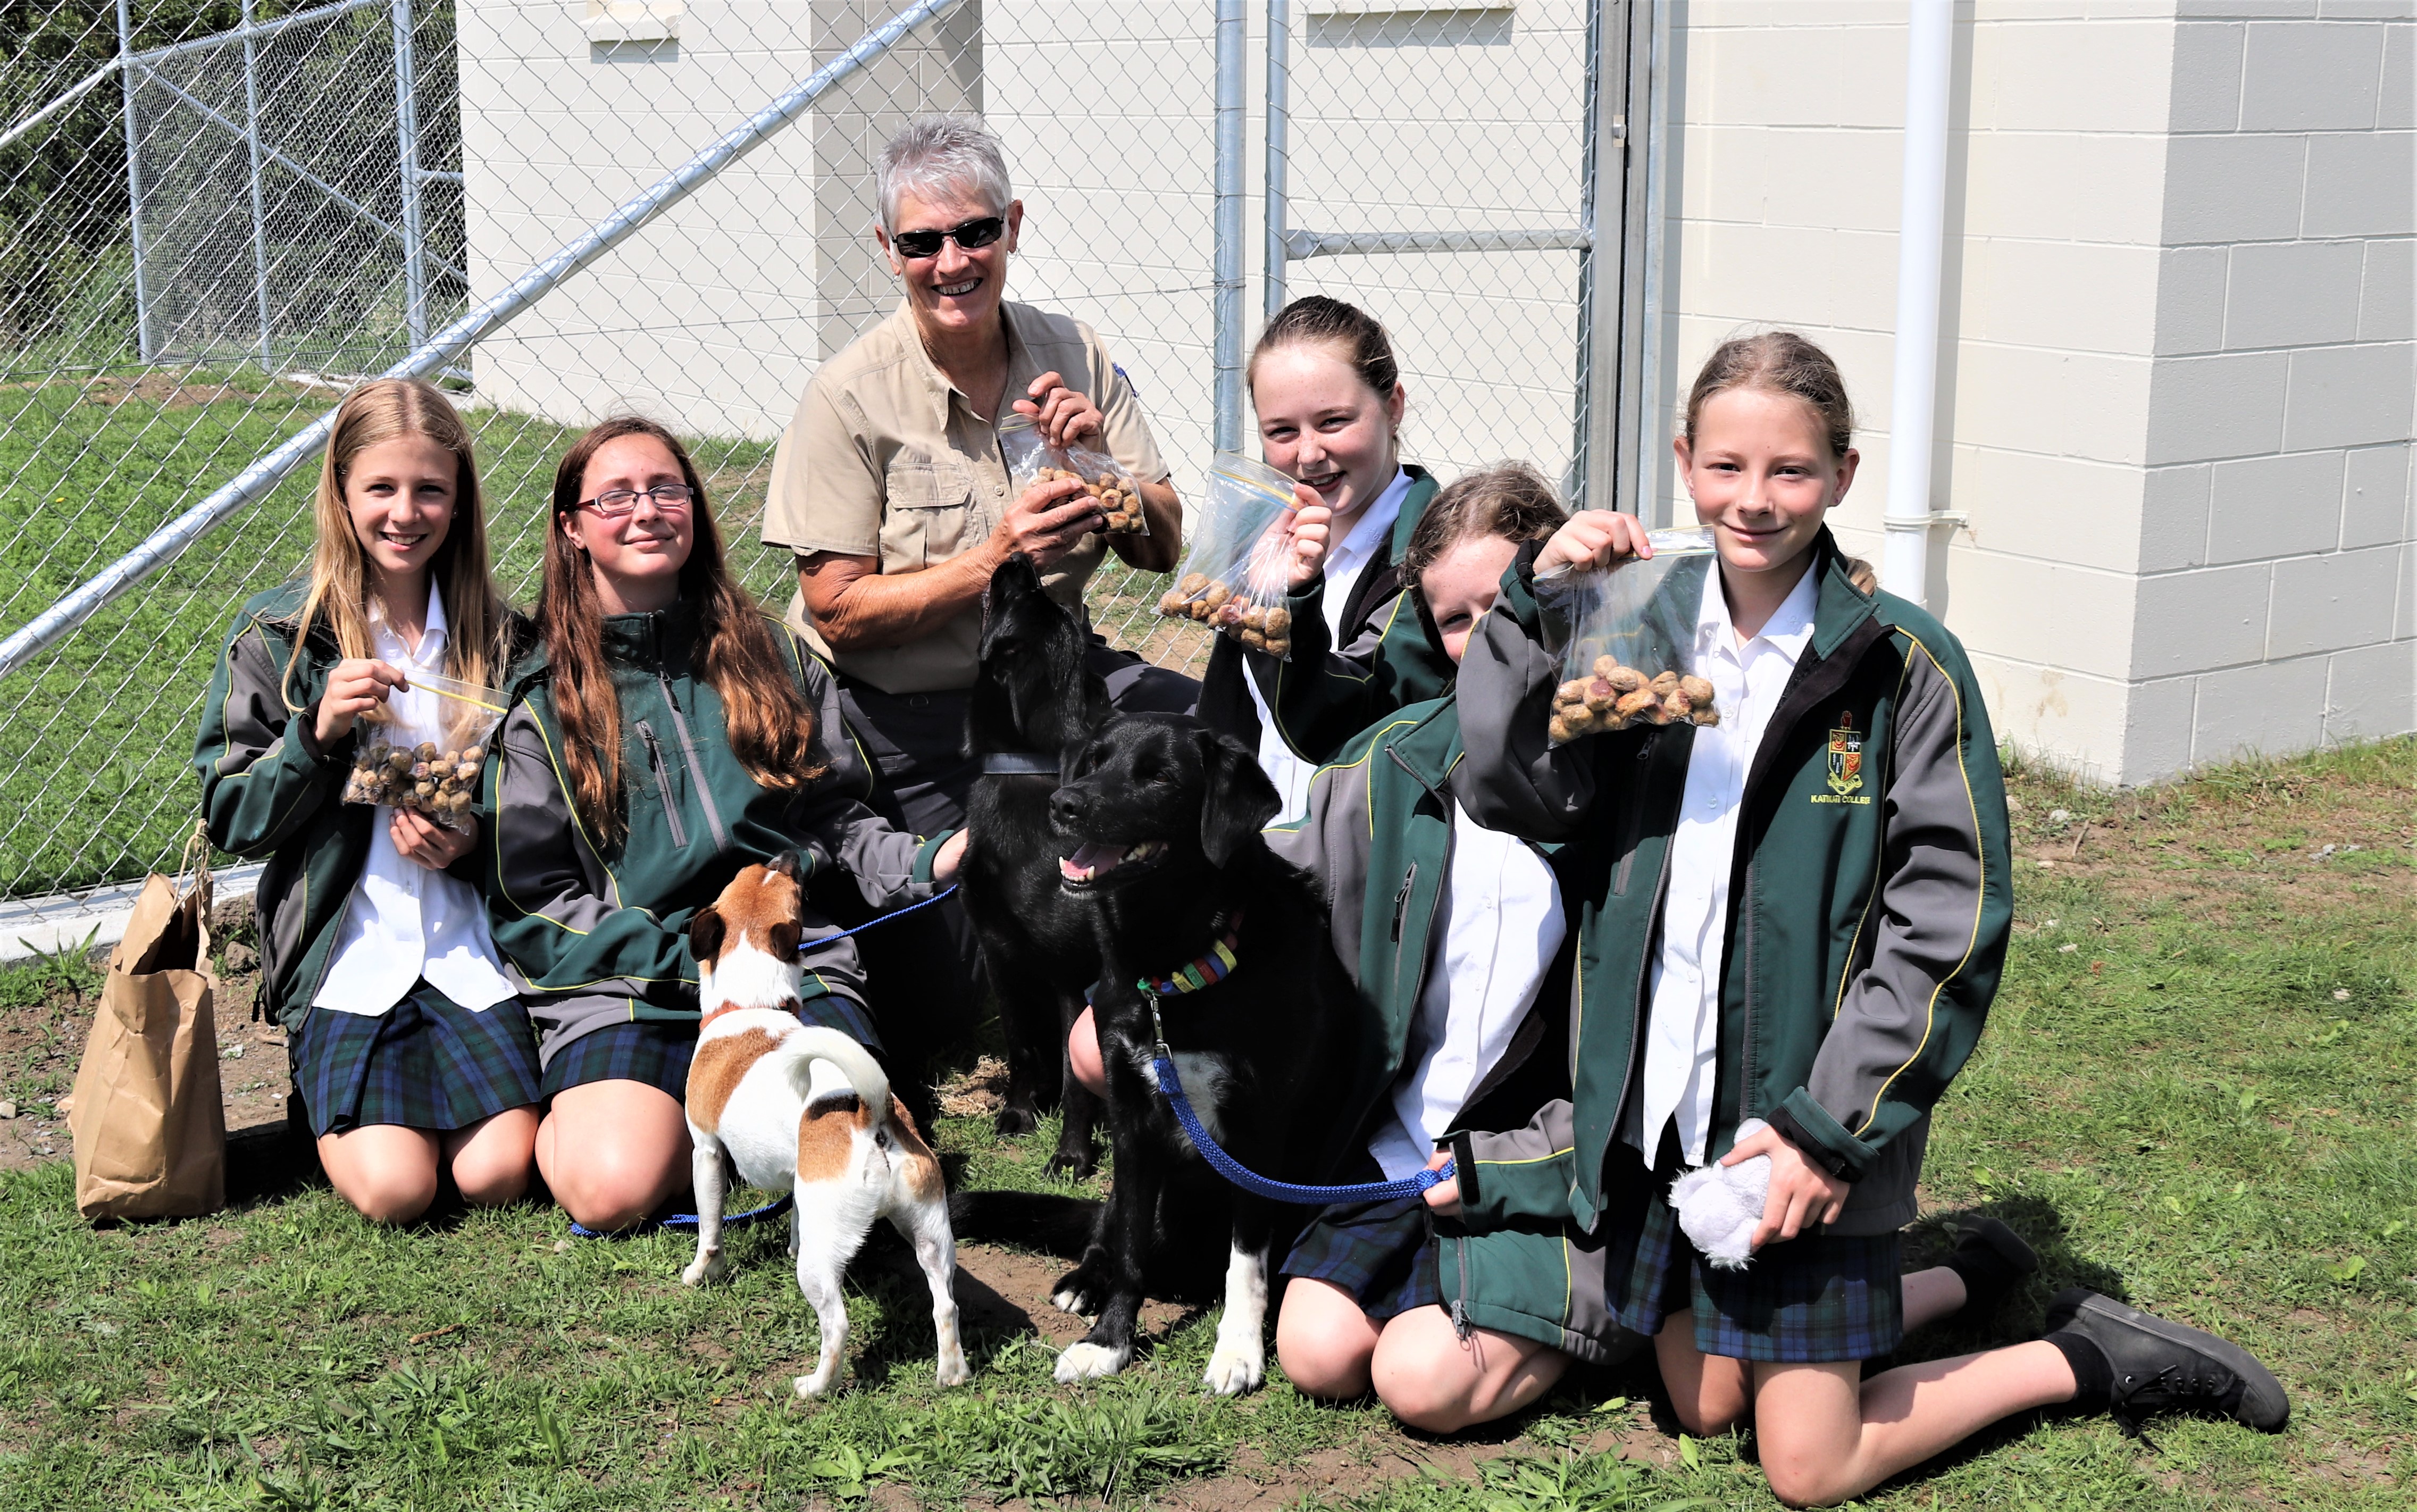 Students give their home made dog biscuits to the rescue dogs.